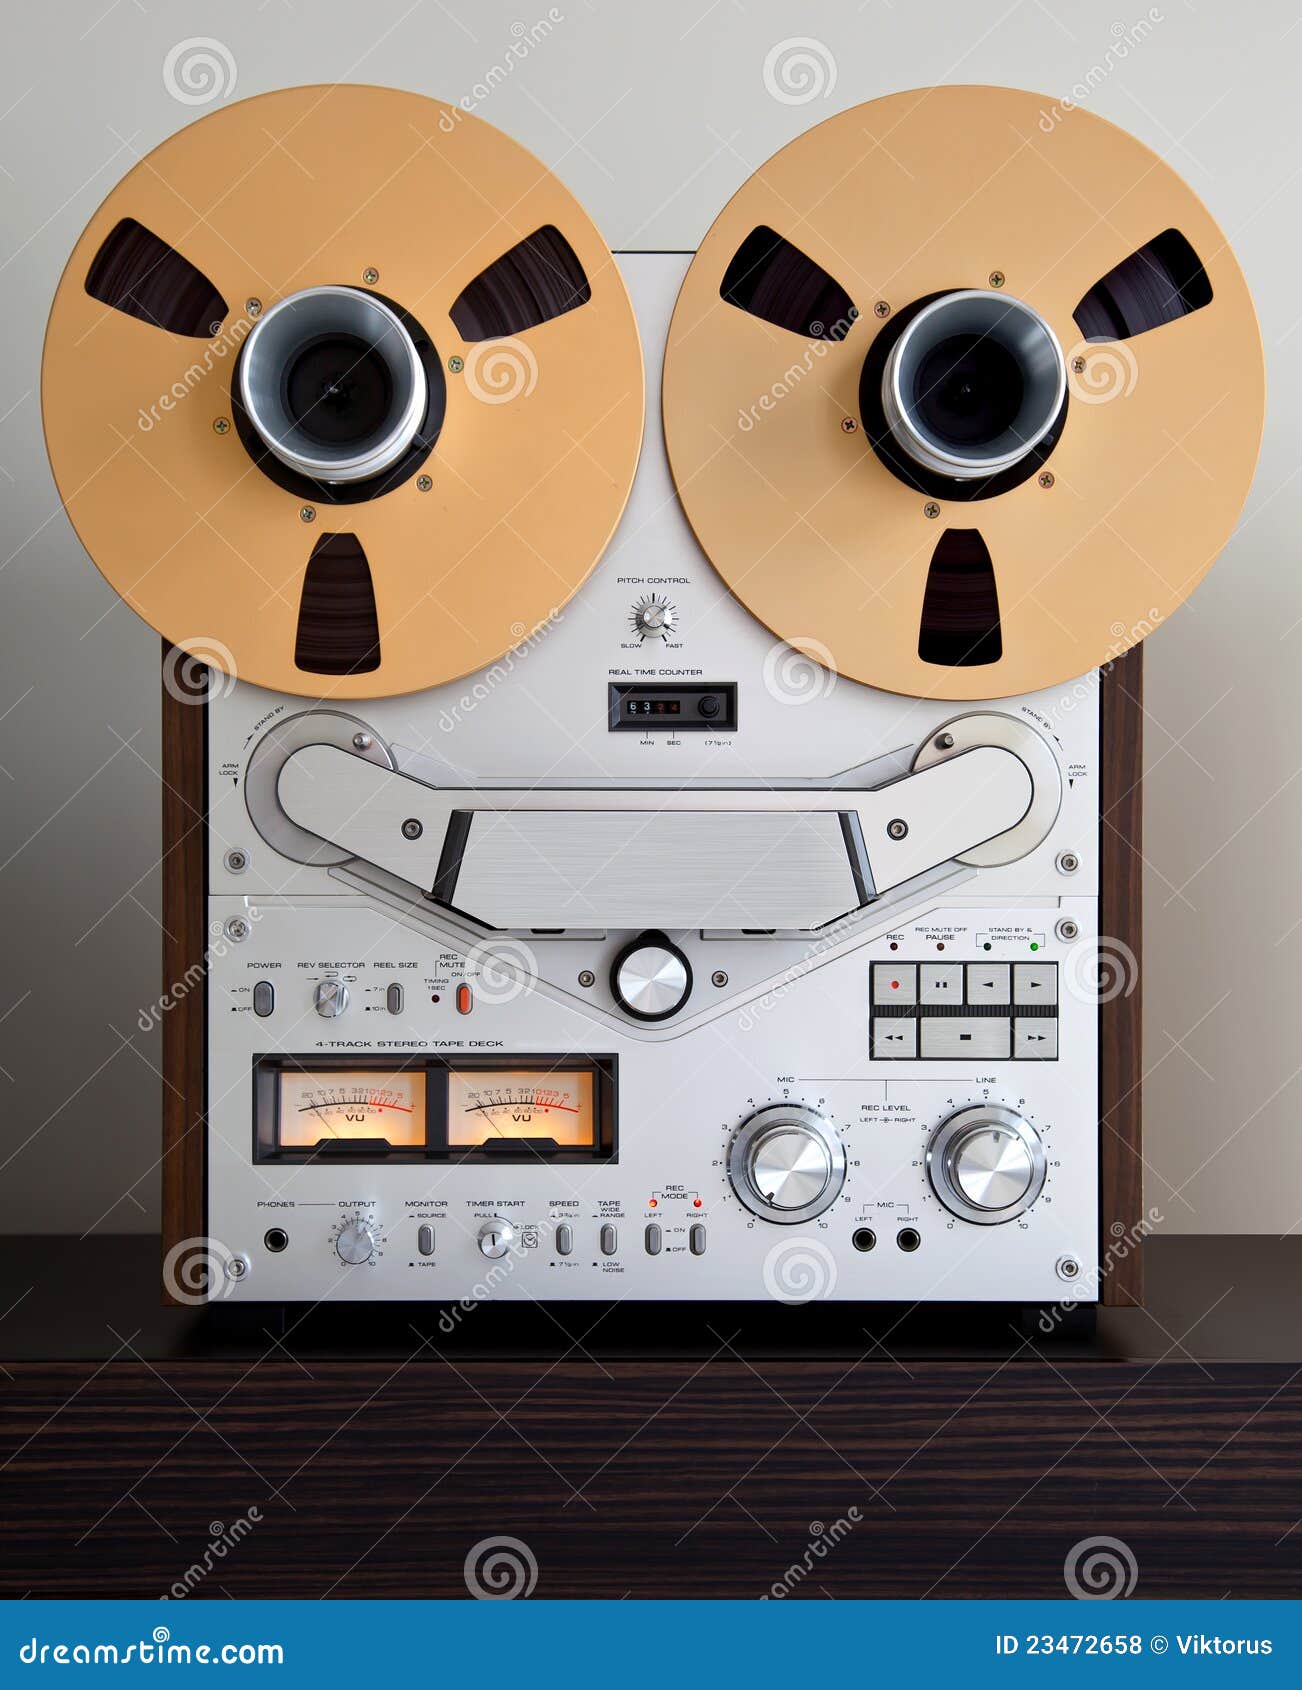 Analog Stereo Open Reel Tape Deck Recorder Stock Photo - Image of record,  golden: 23472658